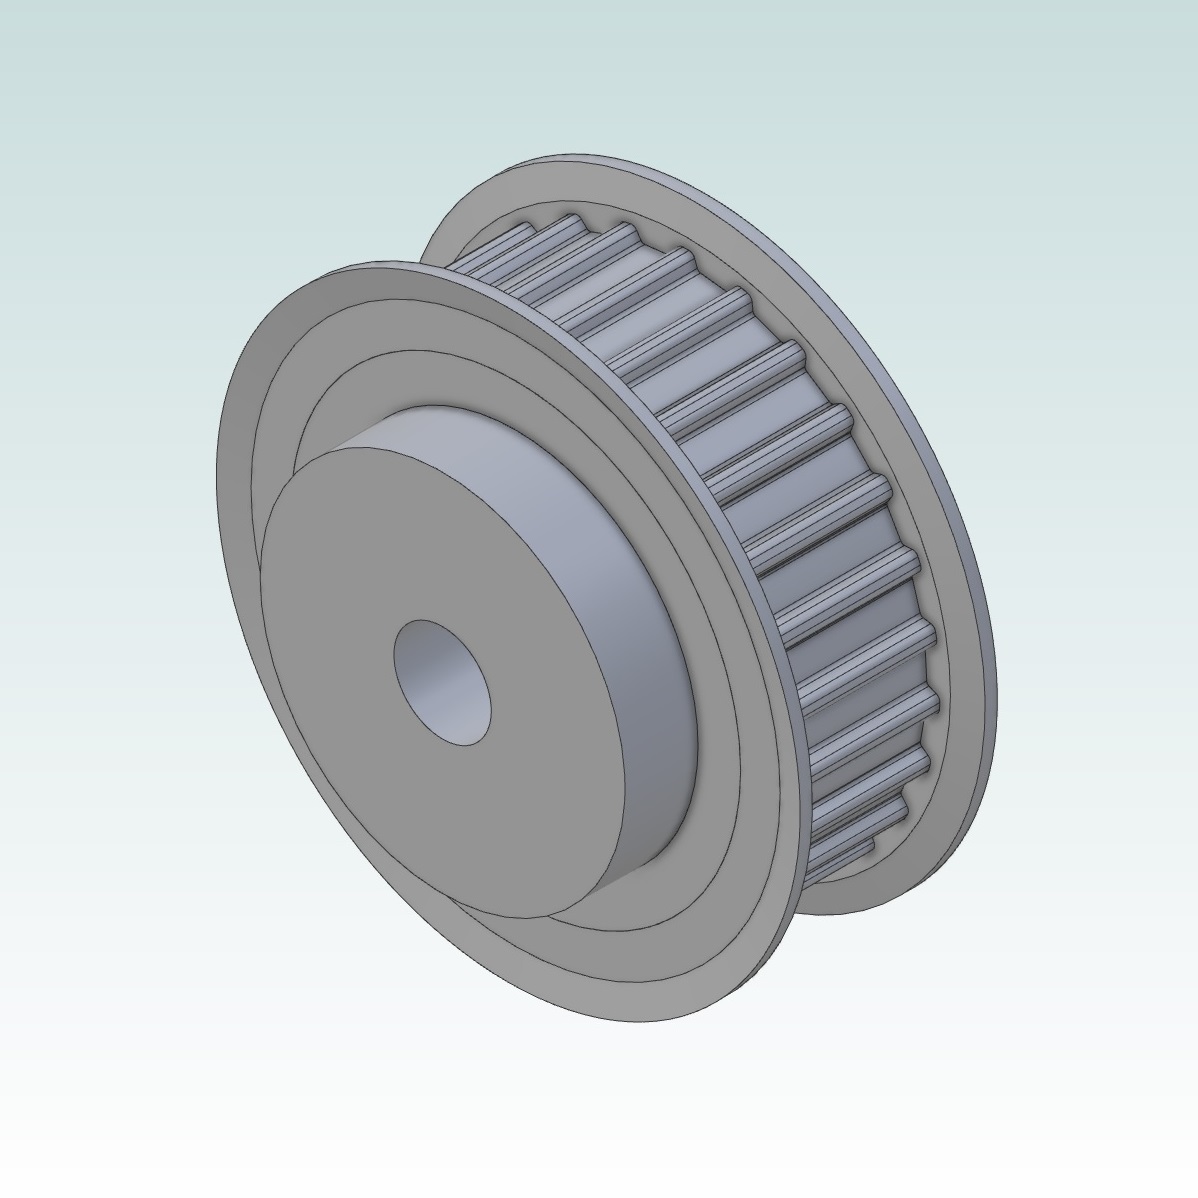 65711 at5 pulley 21at5 z27 for 10mm wide belts 3d render